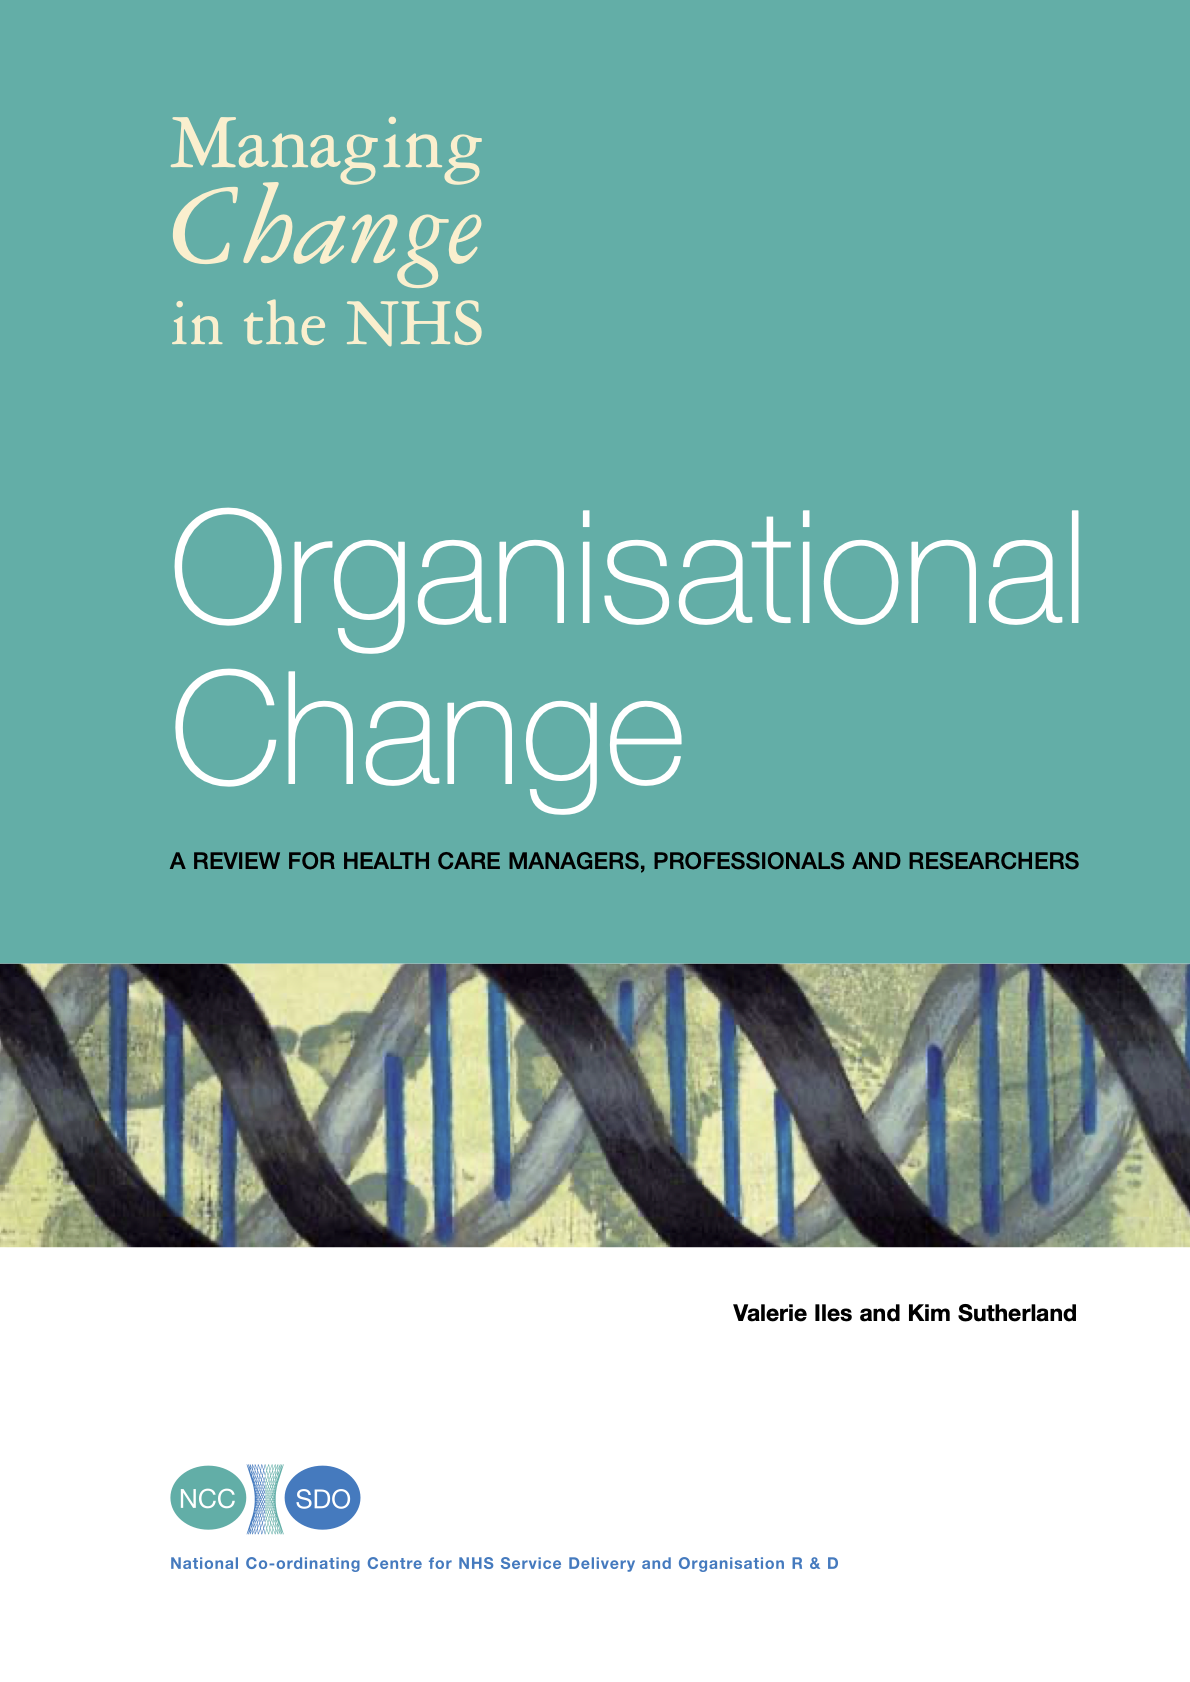 Organisational Change: A Review for Health Care Managers, Professionals and Researchers